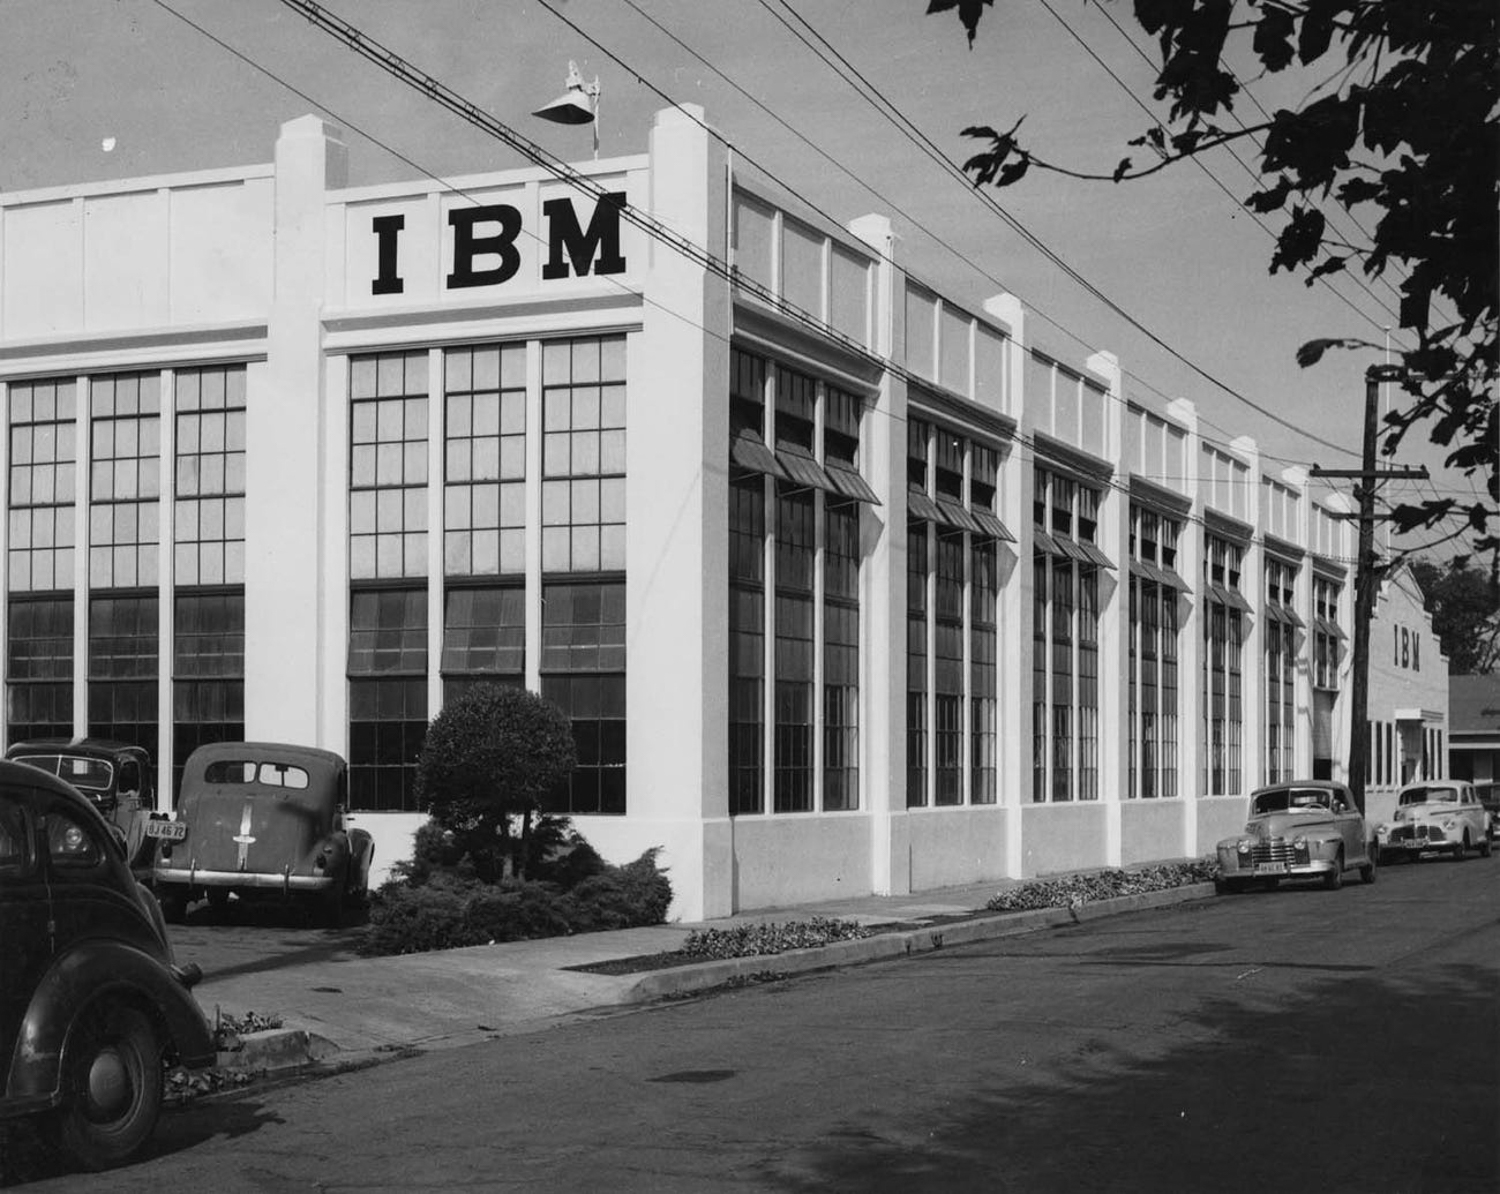 IBM Building 800 Card Manufacturing Plant, image from the History San Jose Photographic Collection